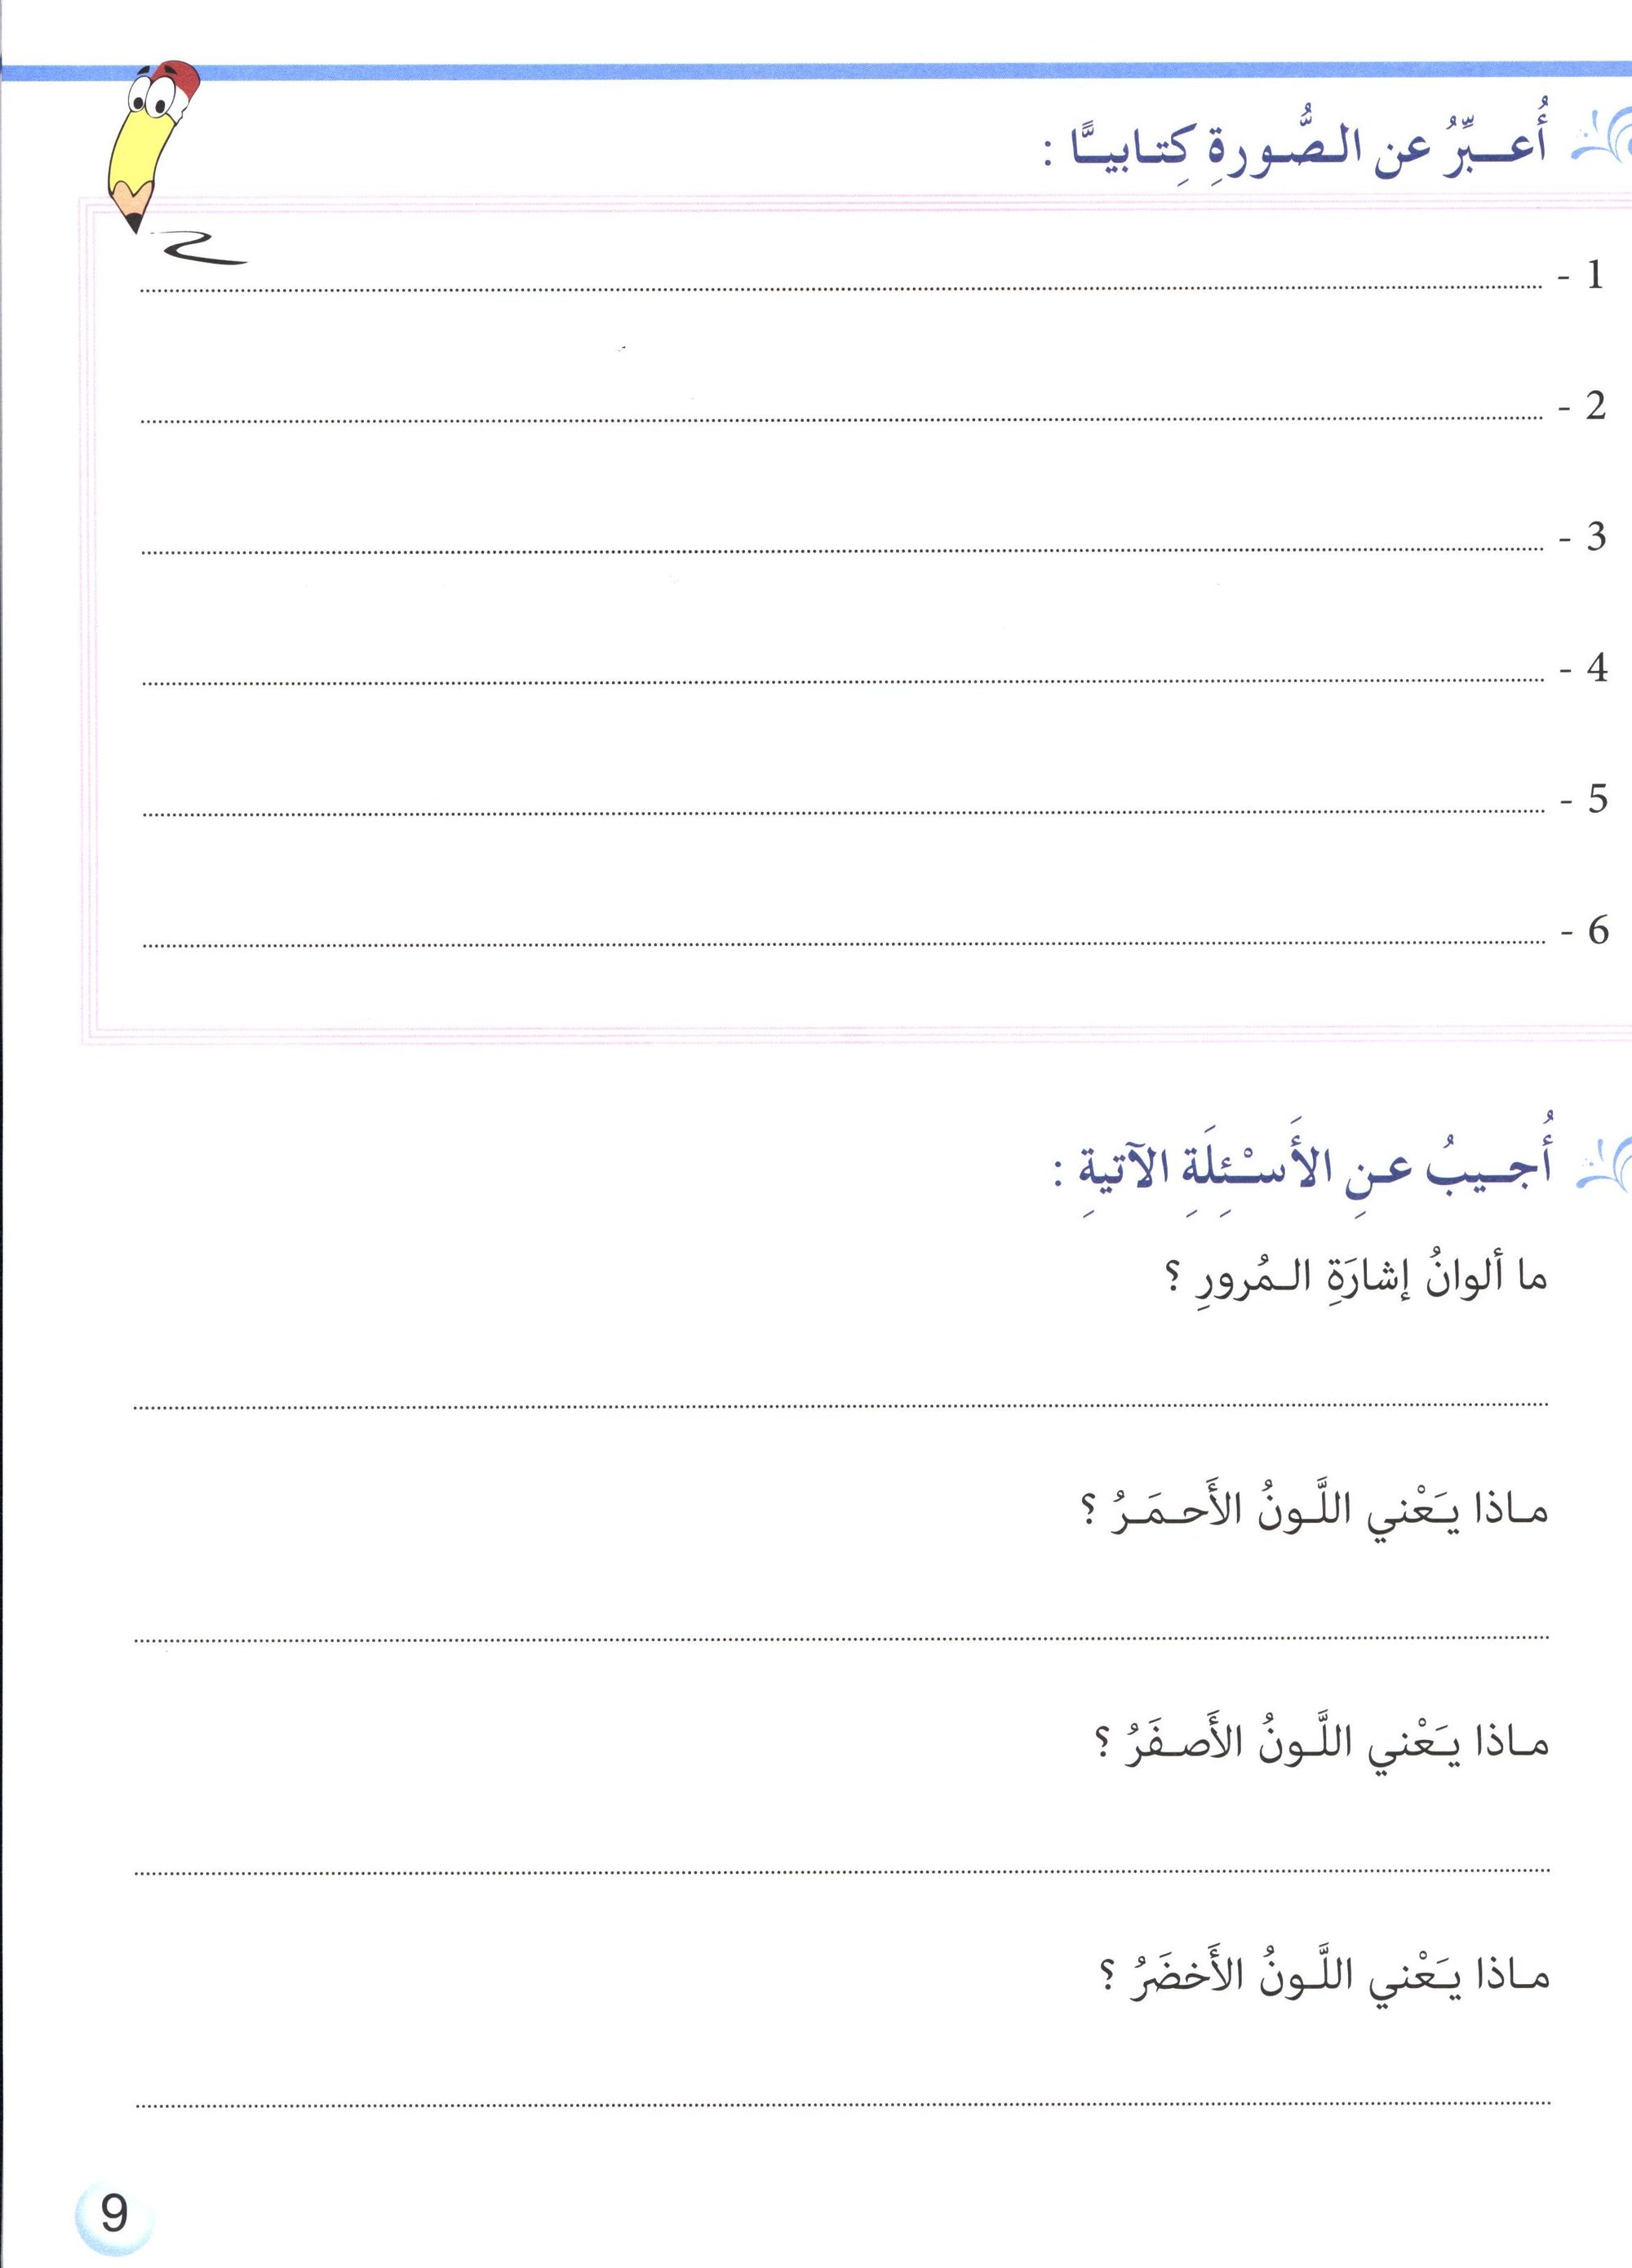 I Love My Language with CD Textbook Level 2 أحبُّ لغتي